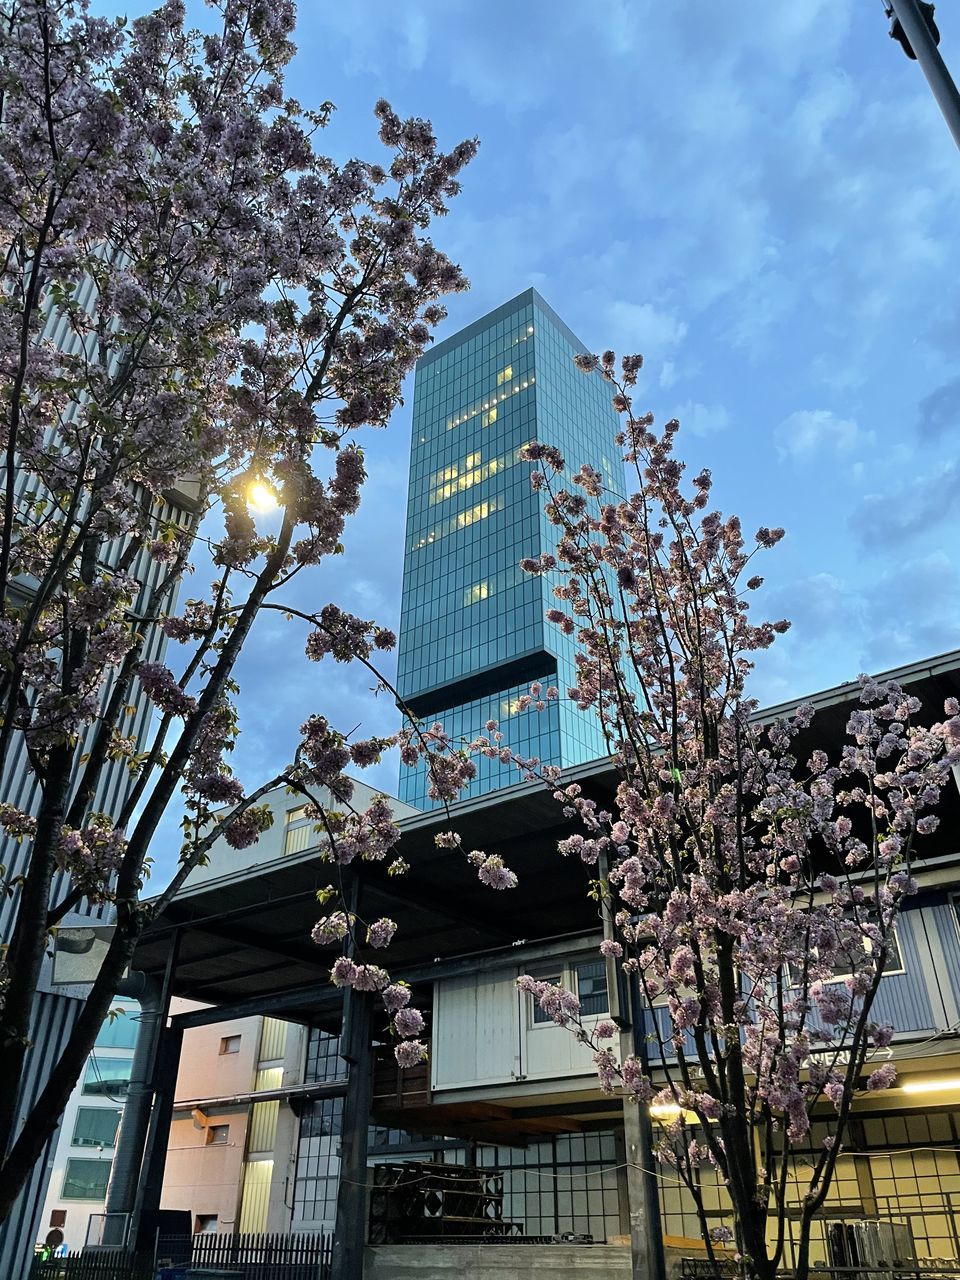 LOW ANGLE VIEW OF FLOWERING TREE AND BUILDINGS AGAINST SKY